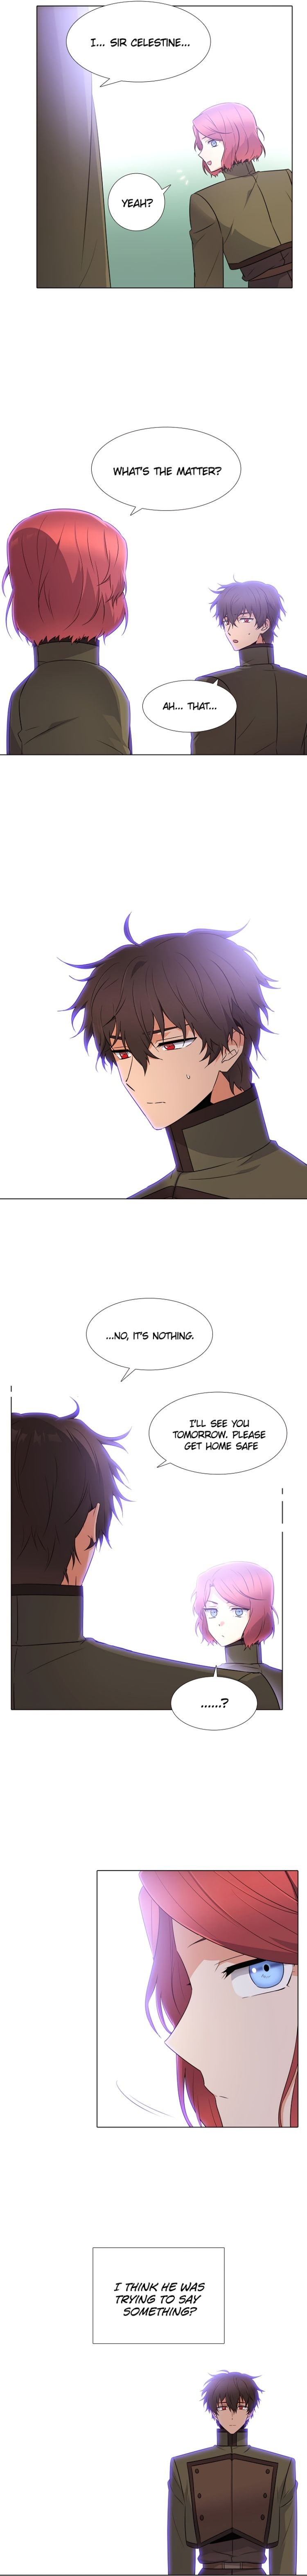 The Villain Discovered My Identity Chapter 8 - Page 10